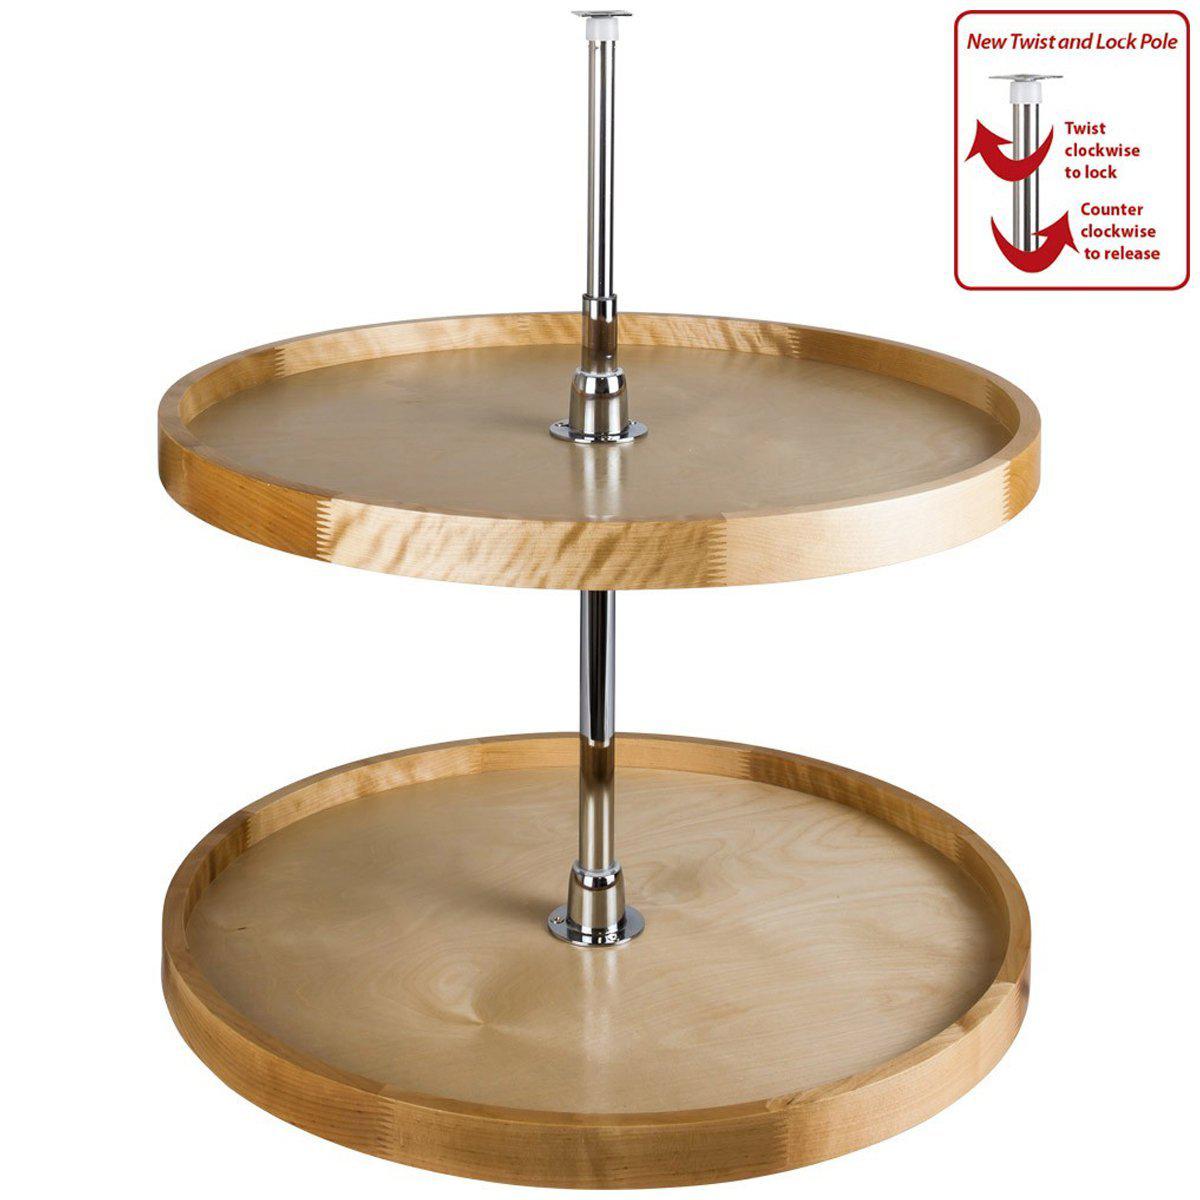 Hardware Resources 18" Diameter Round Wood Lazy Susan Set with Twist and Lock Pole-DirectCabinets.com